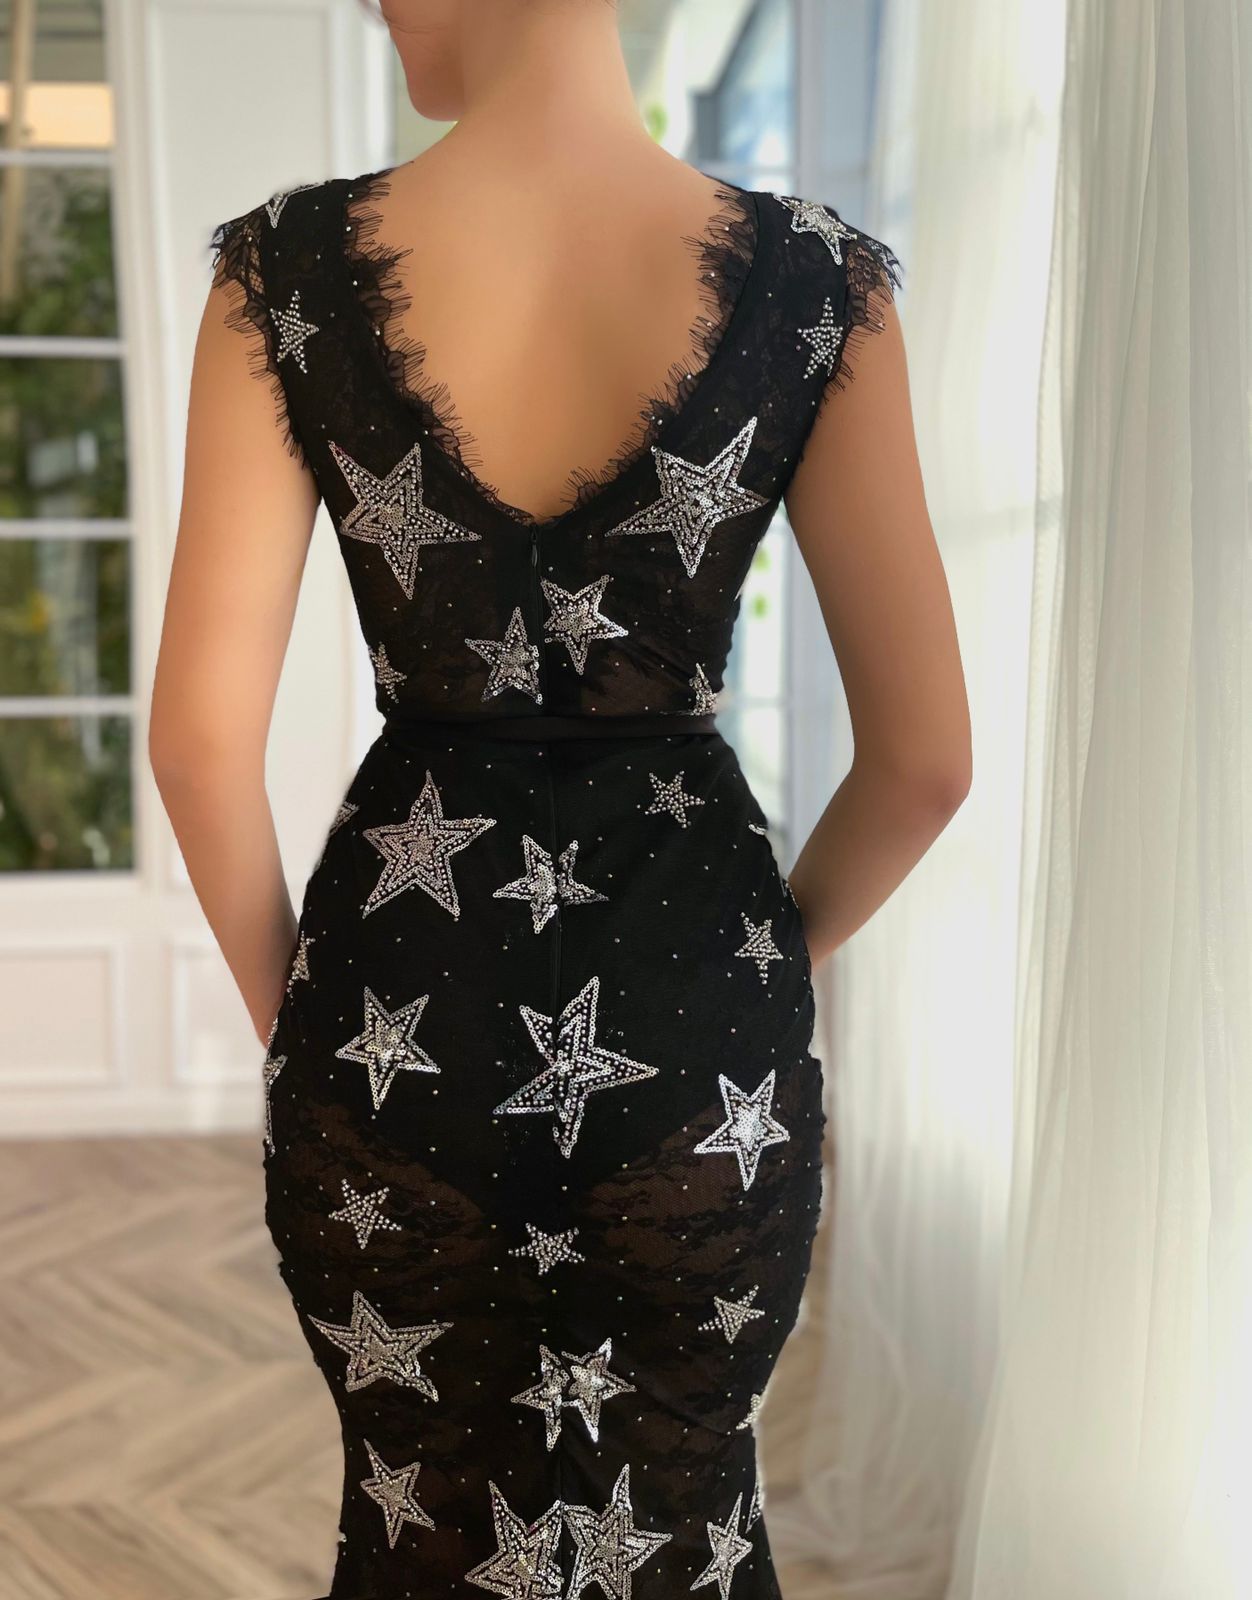 Black mermaid dress with starry fabric, v-neck and no sleeves